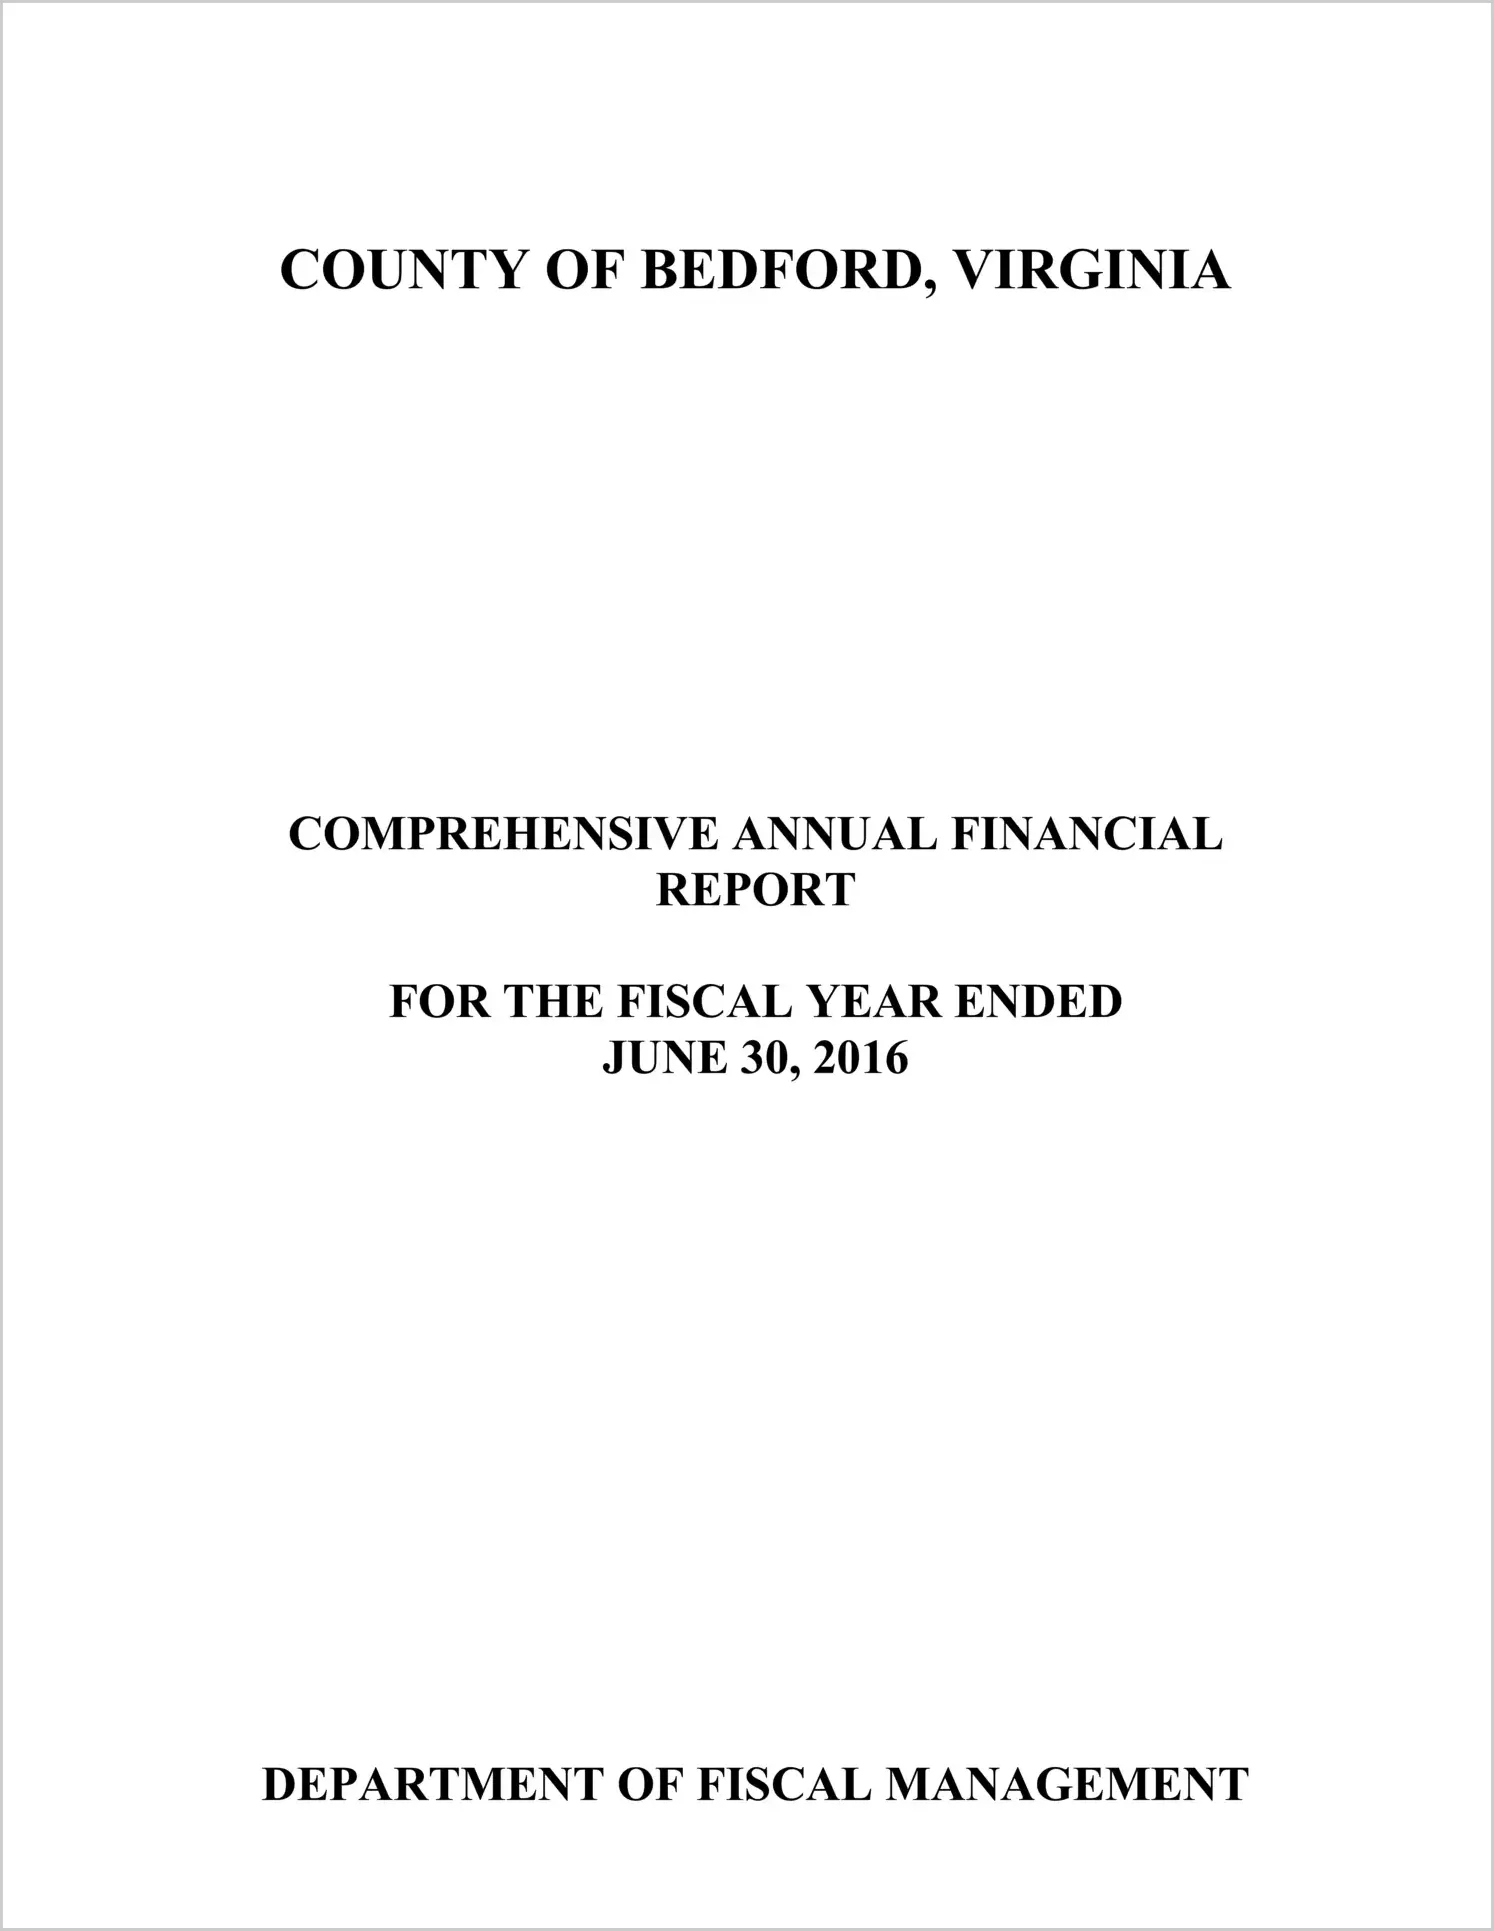 2016 Annual Financial Report for County of Bedford